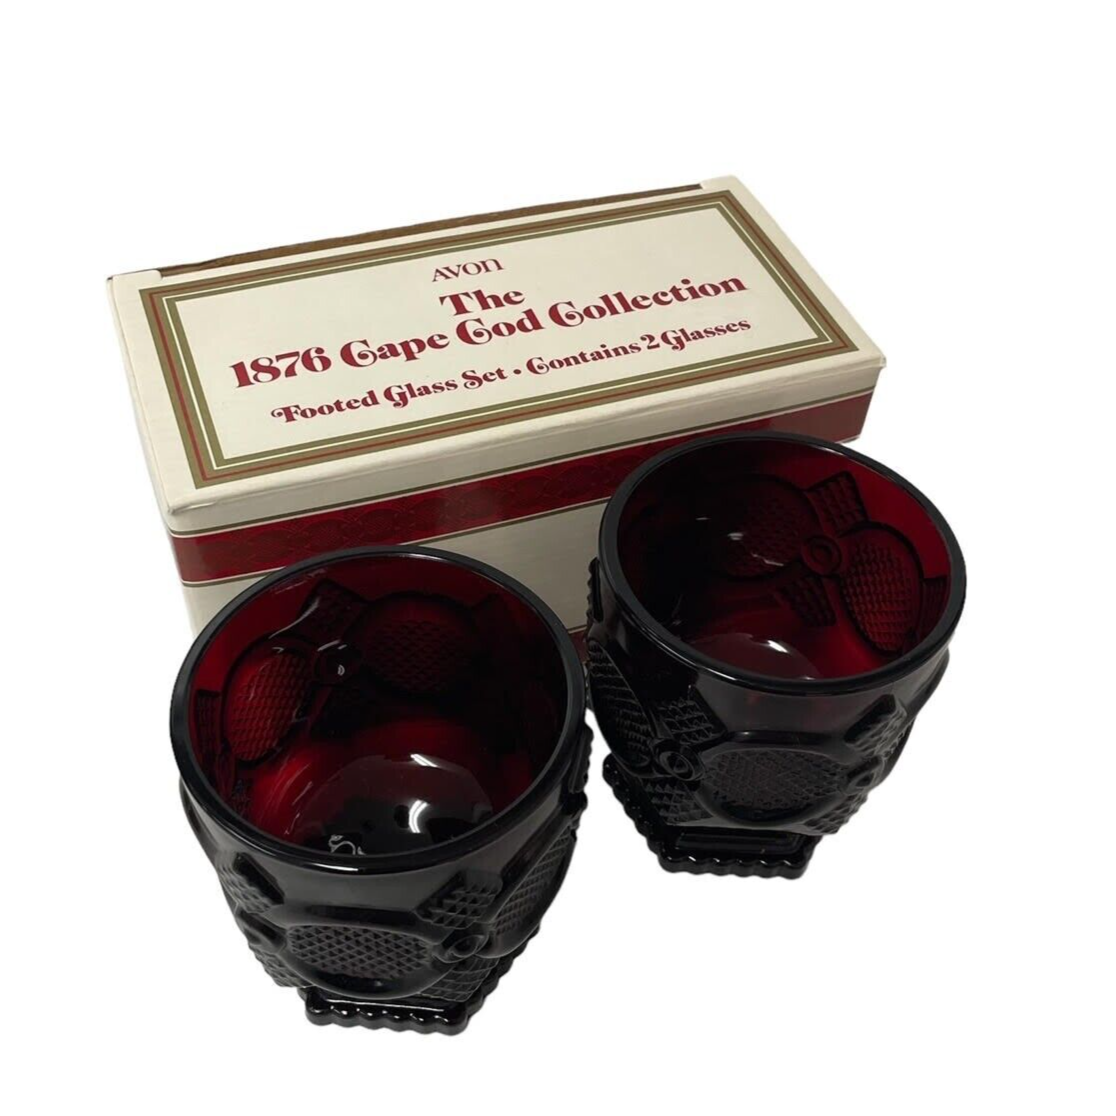 Primary image for Avon 1876 Cape Cod Collection Footed Glass Set Dark Red Set Of 2 New In Box